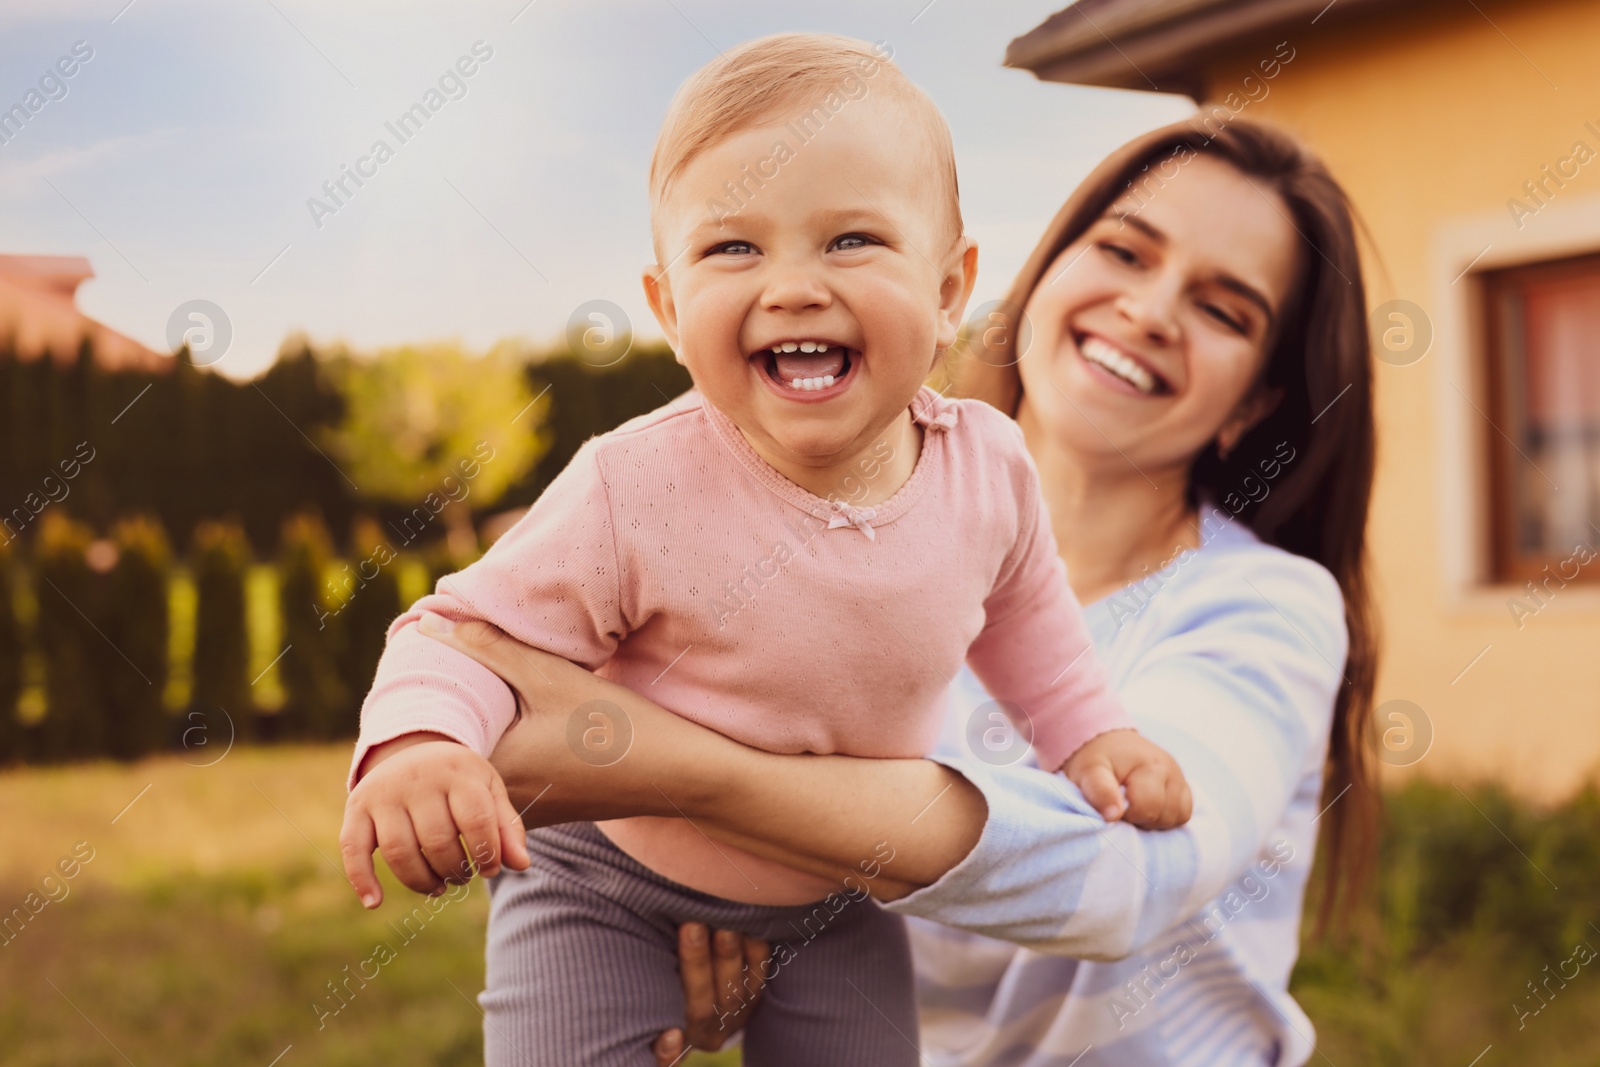 Image of Happy mother playing with her cute baby at backyard on sunny day